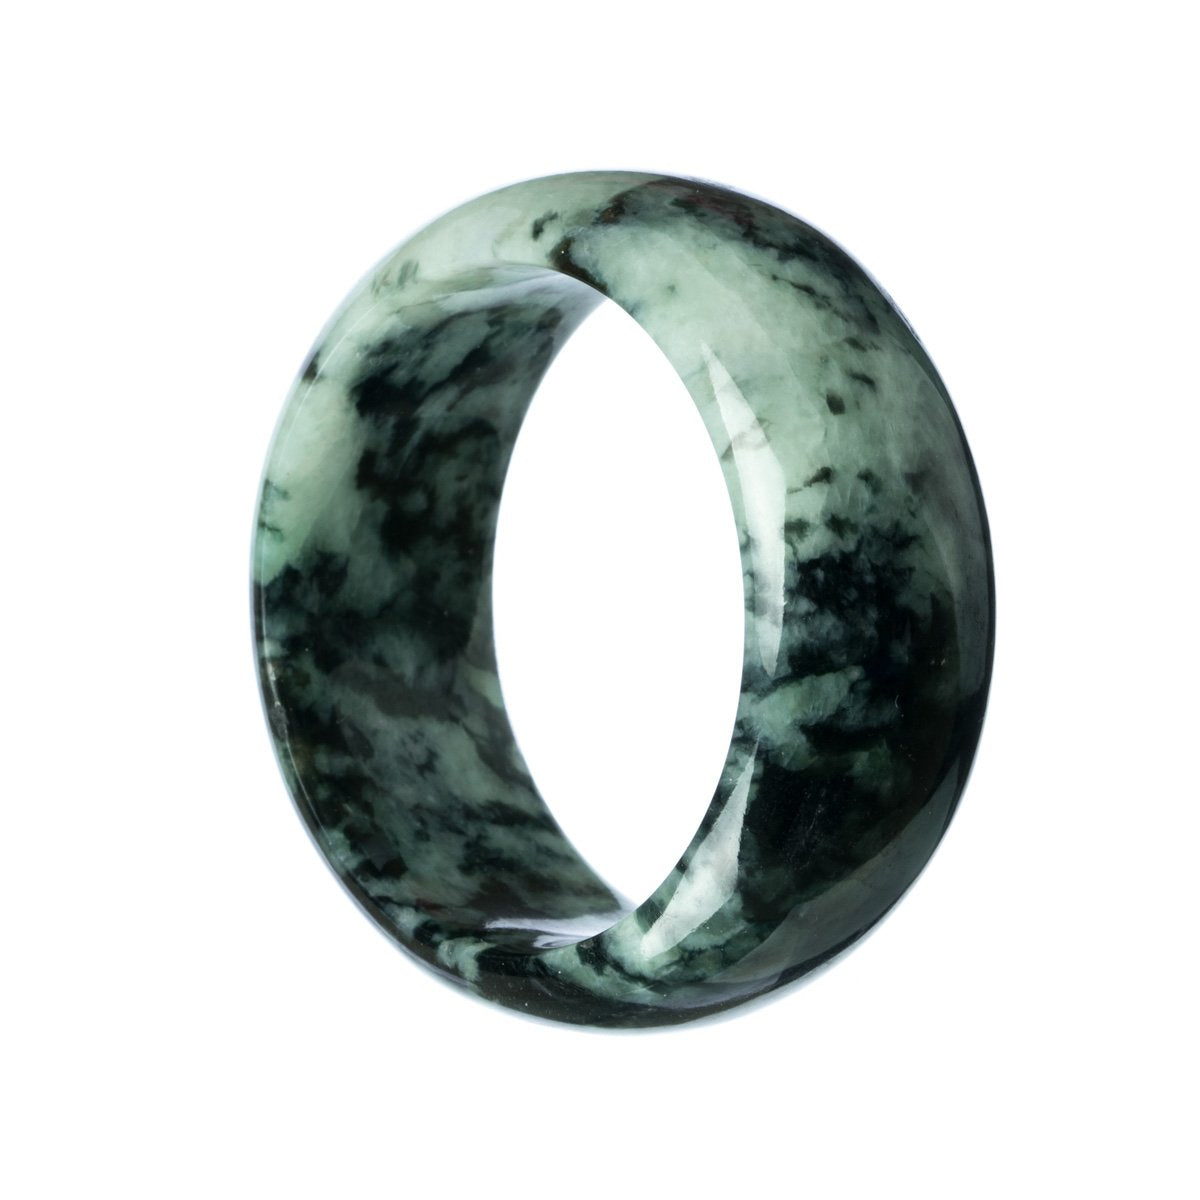 An untreated green jadeite bangle with a flat design, measuring 58mm. Certified authenticity by MAYS GEMS.